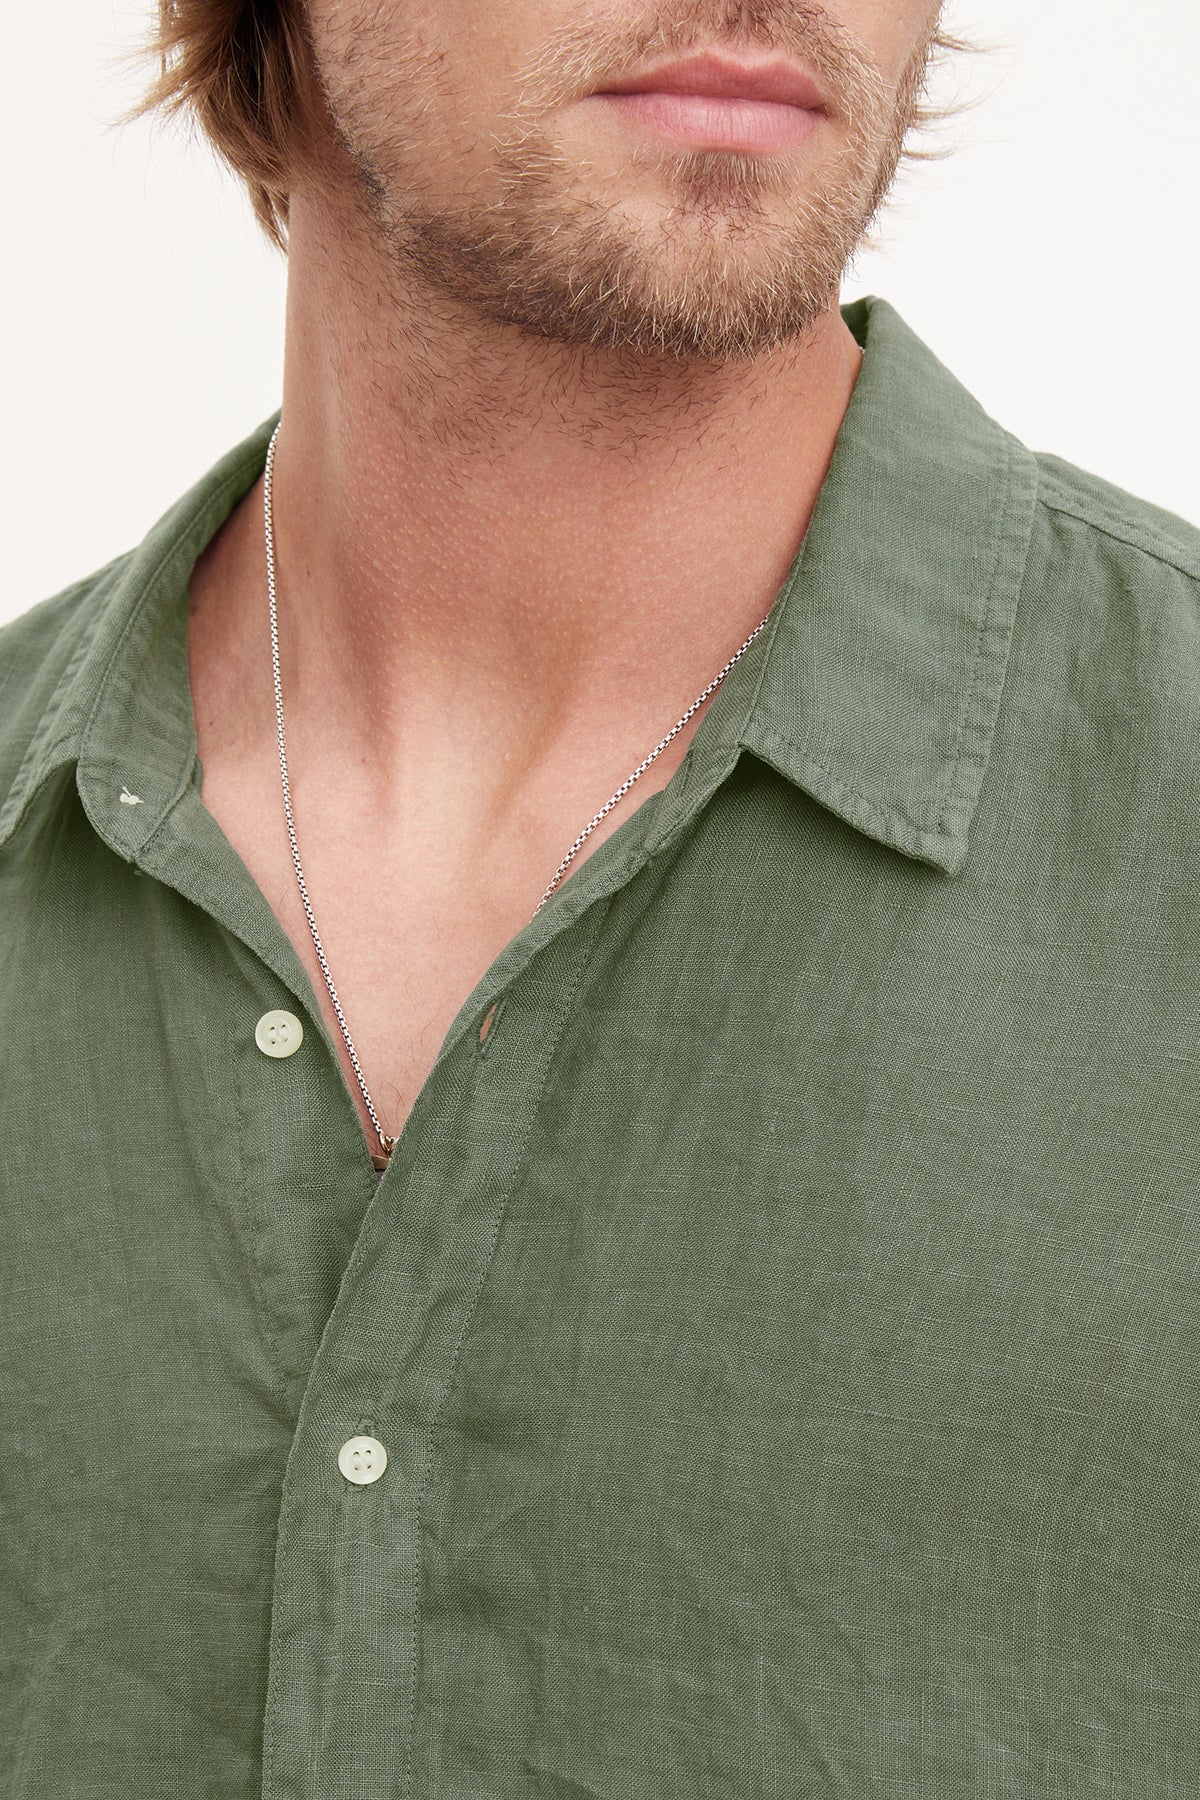 Close-up of a person with a beard wearing an olive green MACKIE LINEN BUTTON-UP SHIRT by Velvet by Graham & Spencer and a silver necklace. The image focuses on the short sleeve shirt's collar and upper chest area, perfect for a summer wardrobe.-36909321617601